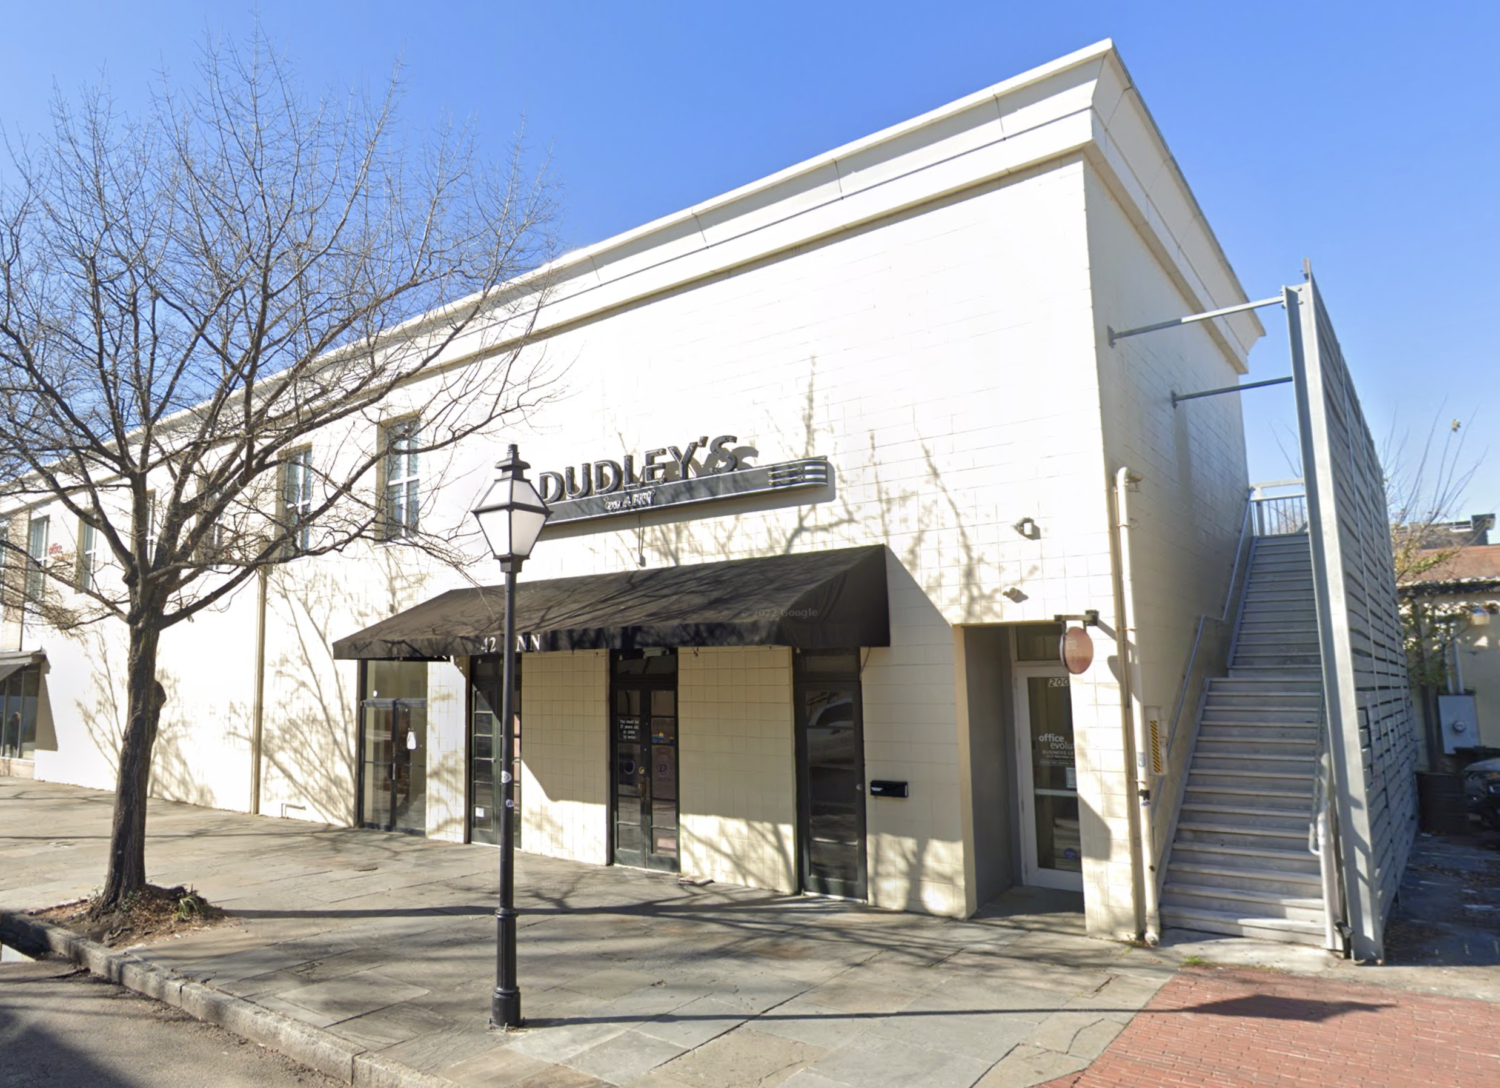 January 2022 Google Street View of Dudley's on Ann in Charleston, South Carolina.